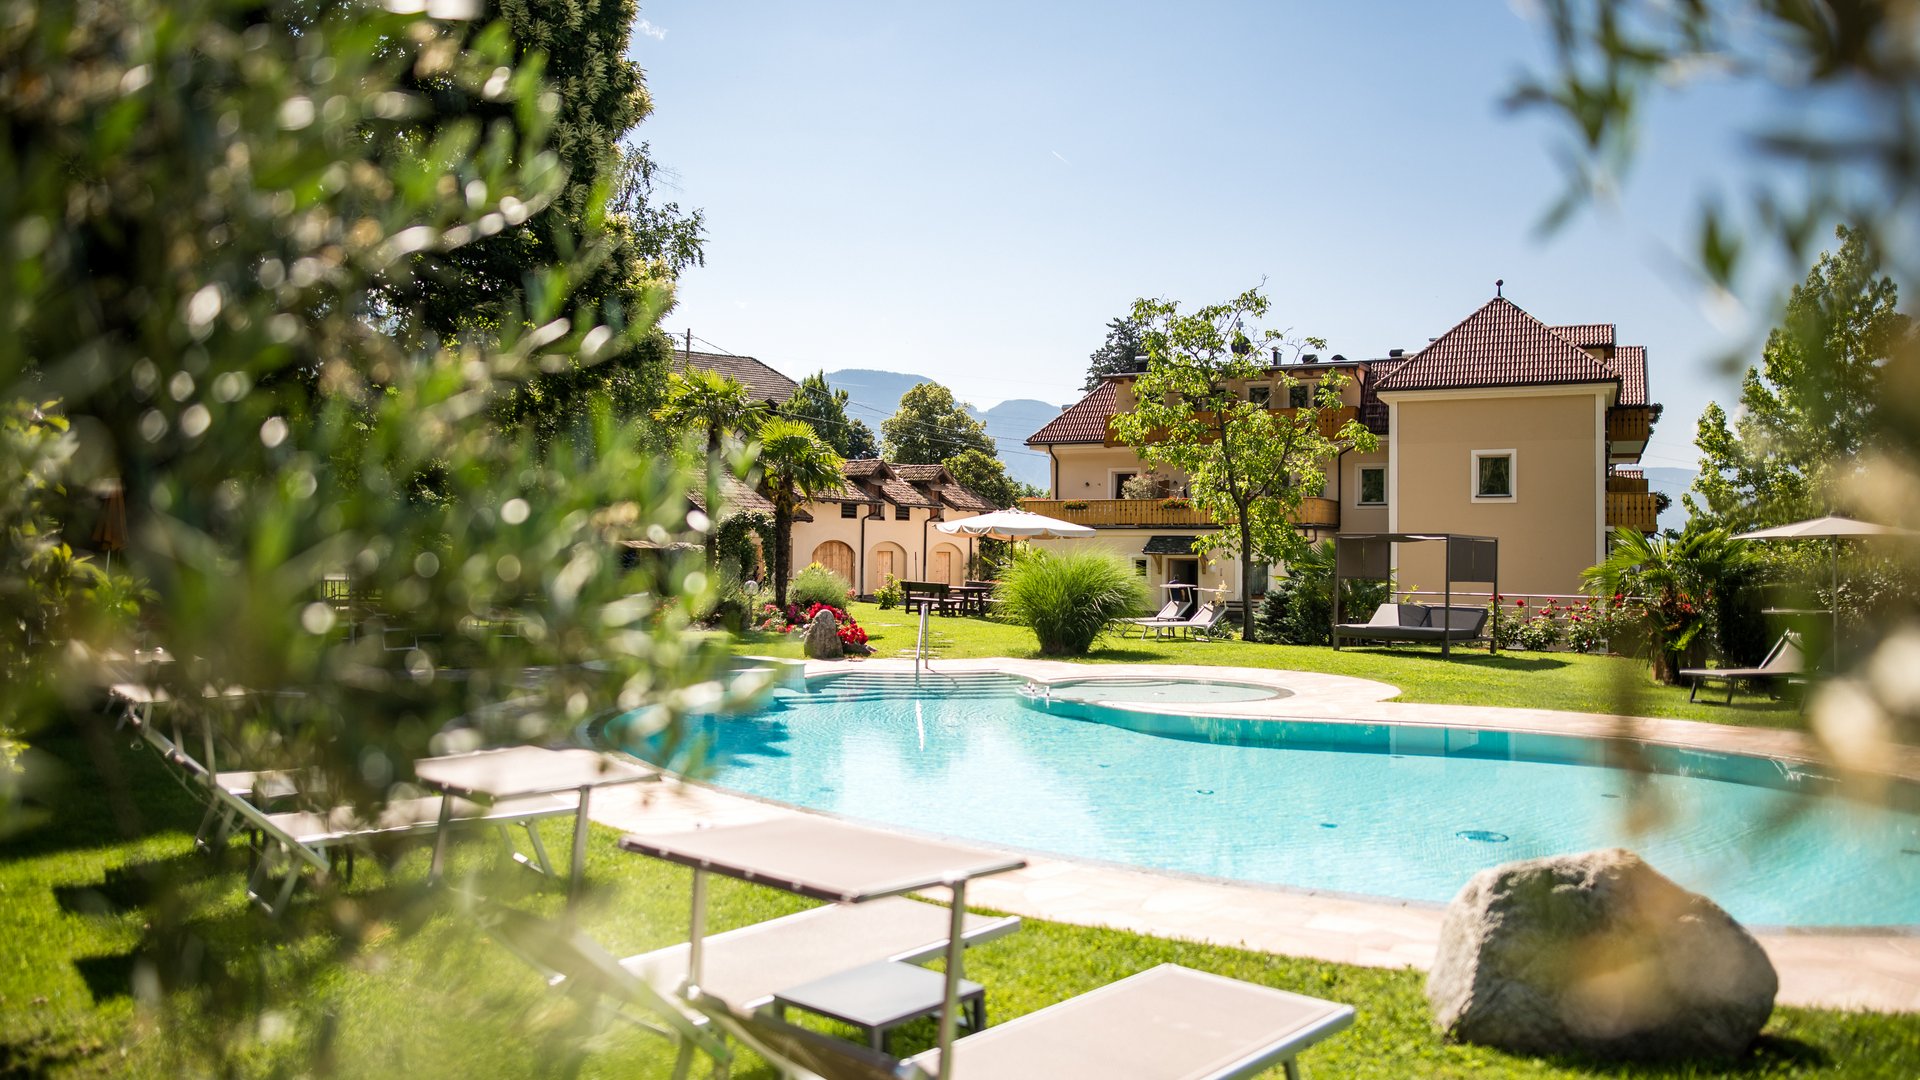 Book your holiday in Meran, South Tyrol